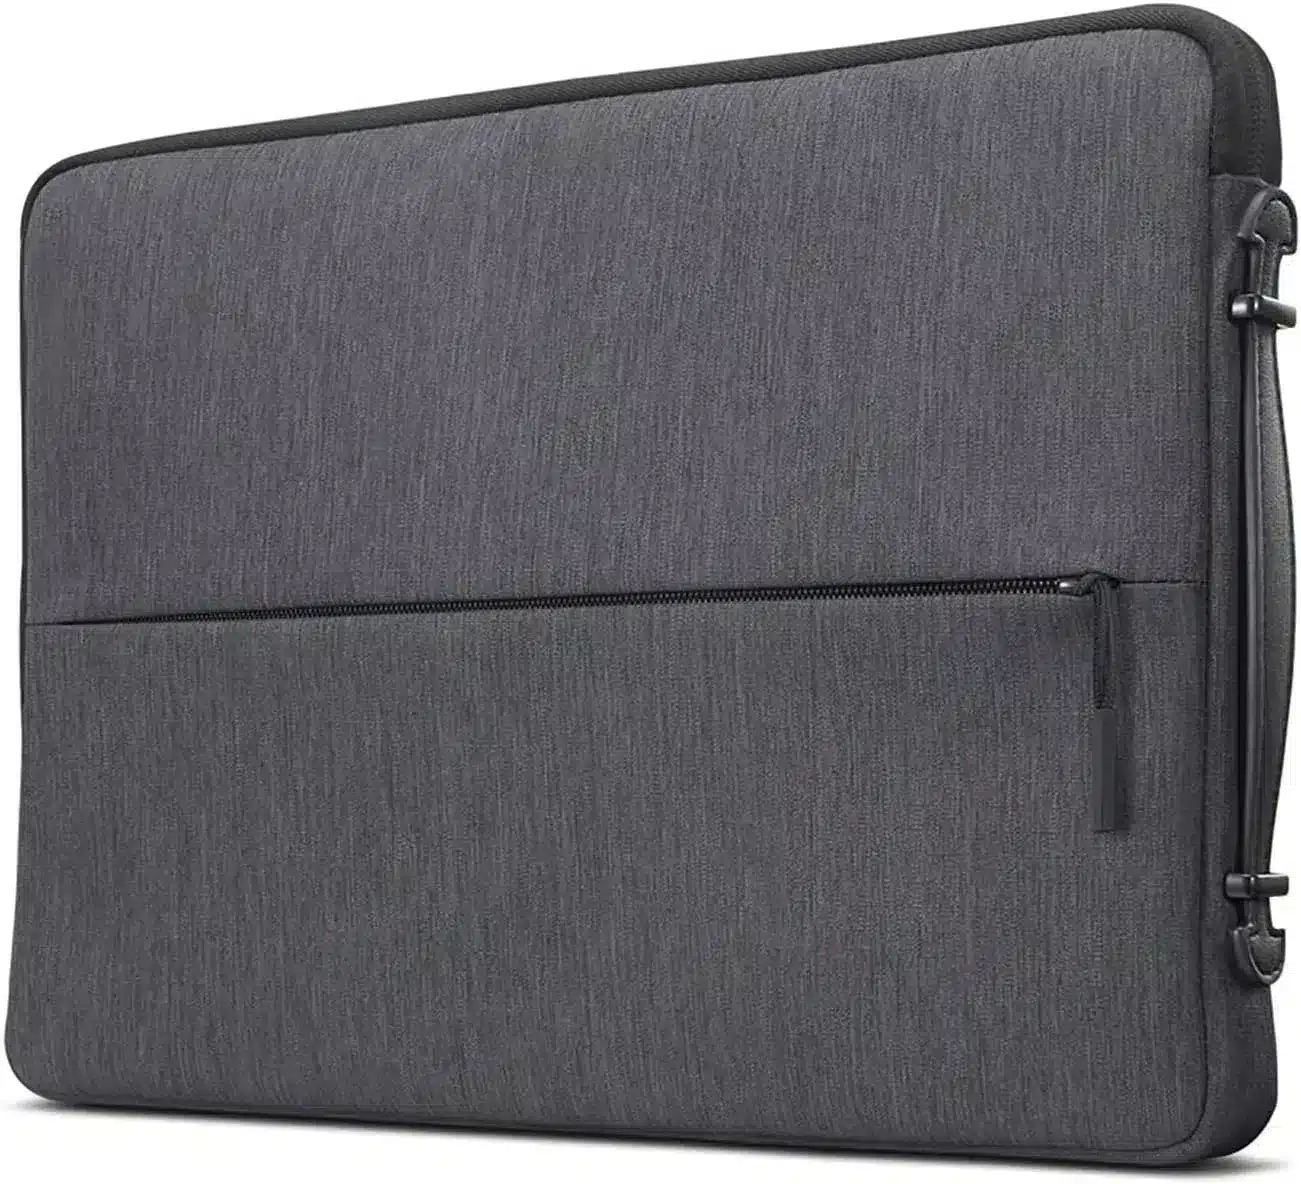 Lenovo Urban Sleeve for 14-inch Laptop/Notebook/Tablet - Water Resistant - Padded Compartments, Zippered Accessory Storage - Reinforced Rubber Corners - Extendable Handle - GX40Z50941 - Charcoal Grey